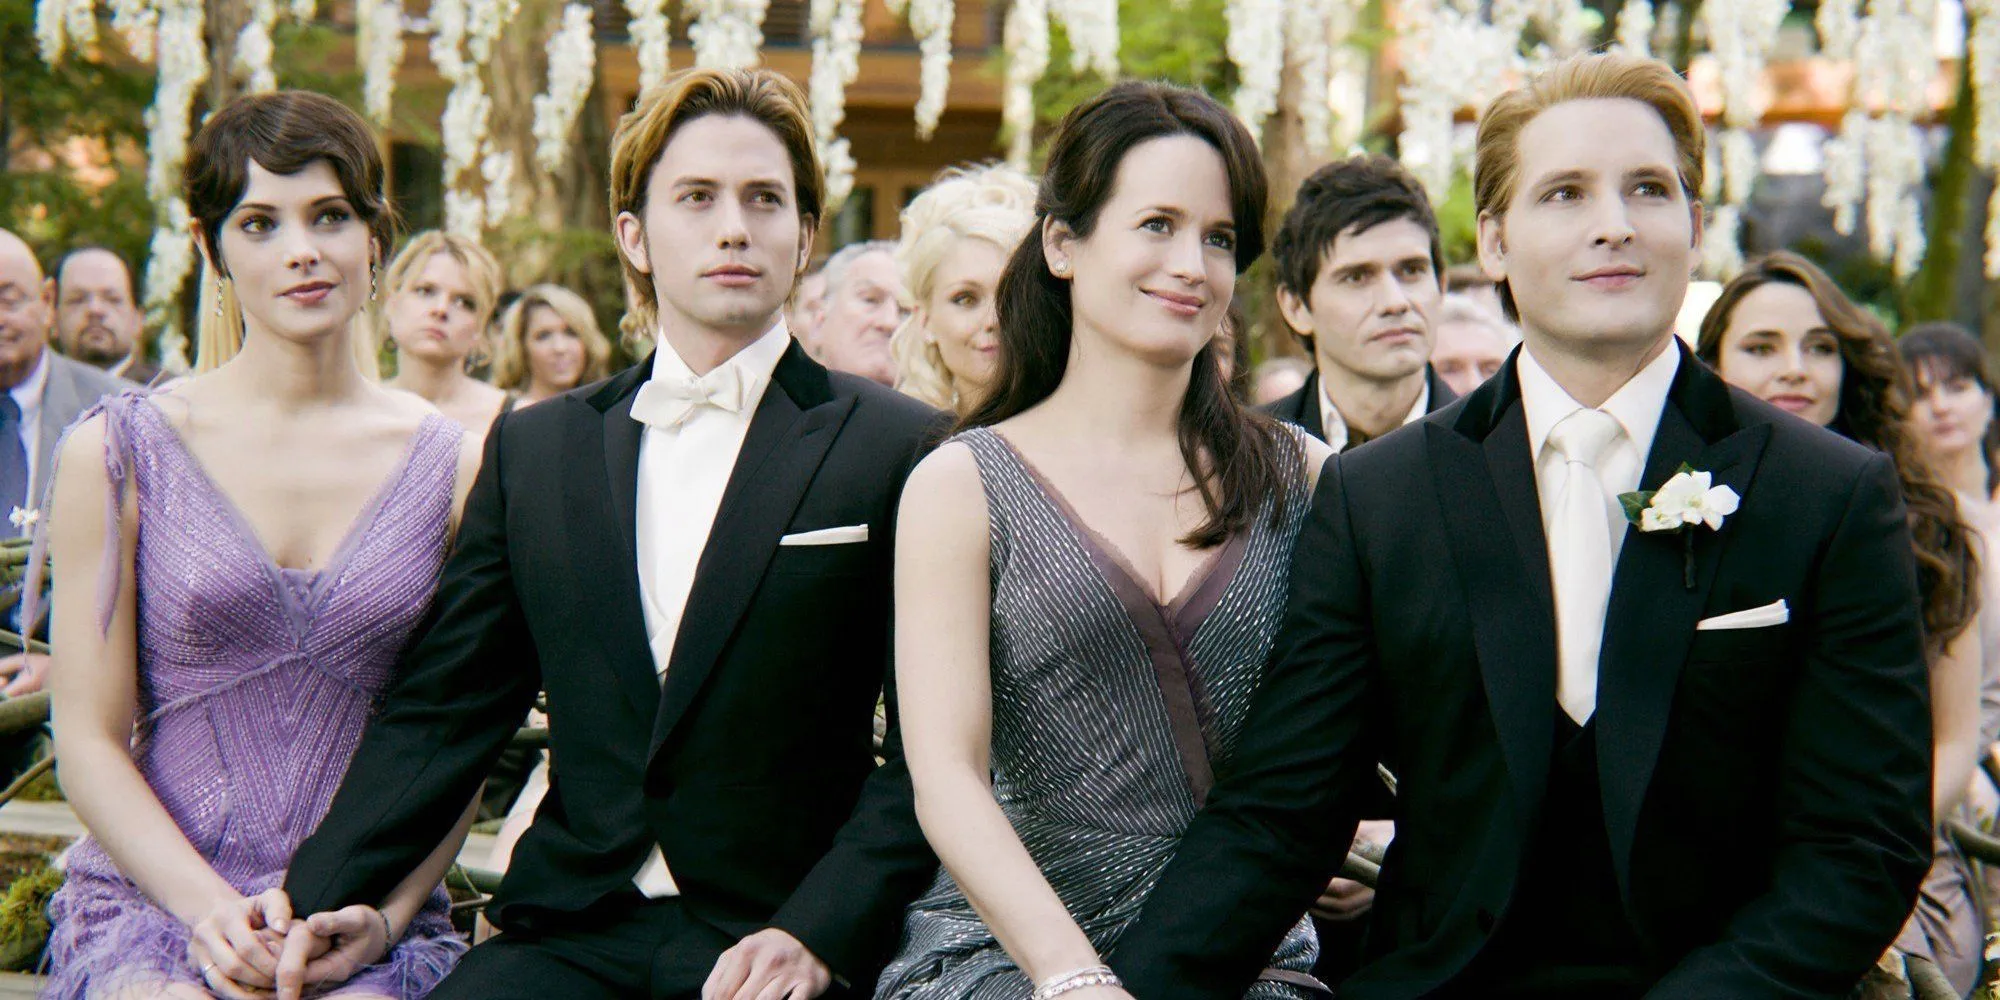 Alice, Jasper, Esme, and Carlisle holding hands and smiling at Bella and Edward's wedding.